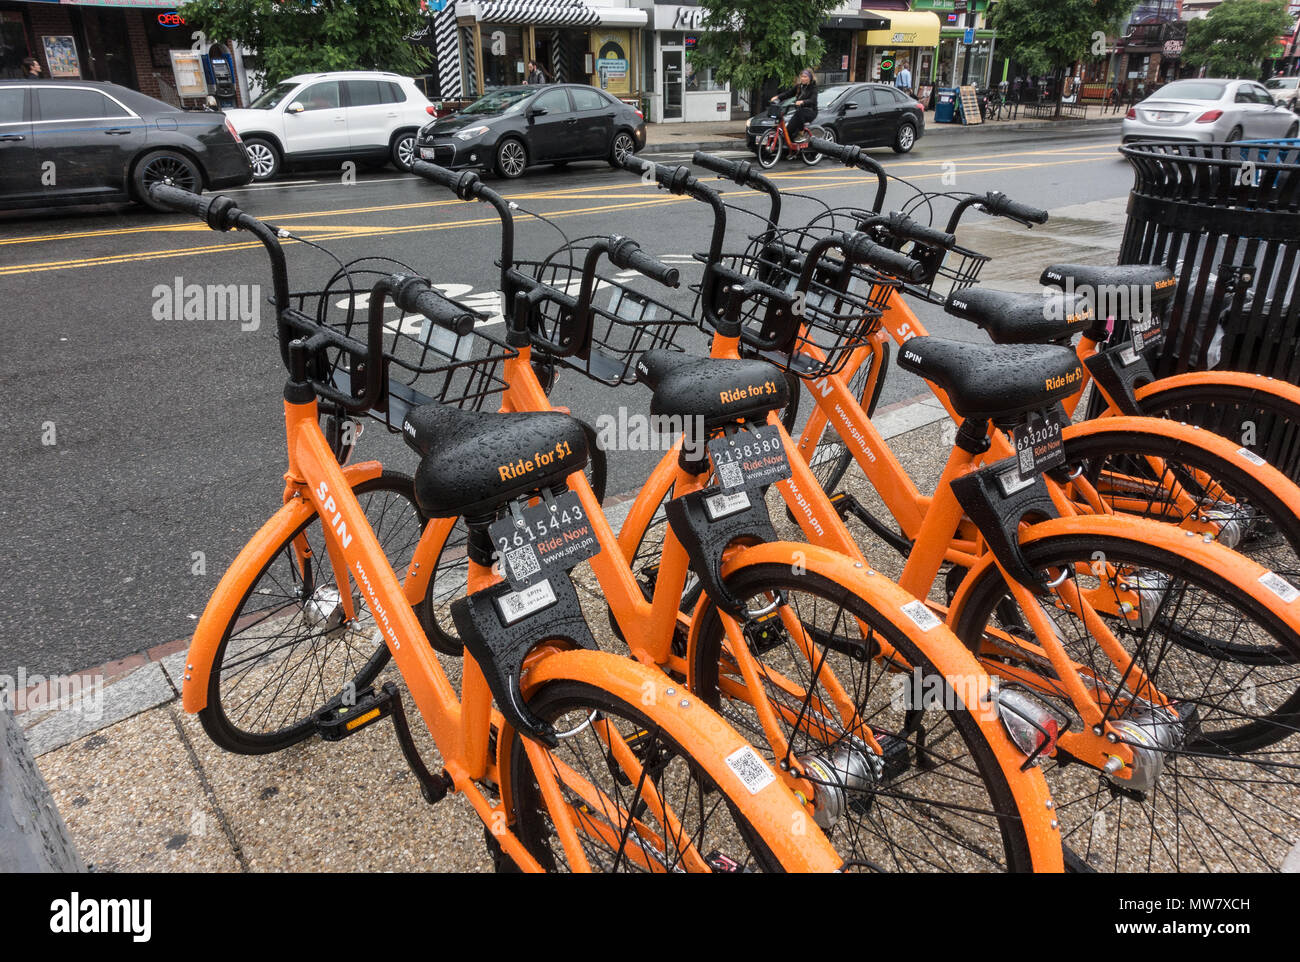 Dockless SPIN bikes await riders on rainy day in Adams Morgan, Wash., DC.  SPIN is one of several dockless bikes on streets during 2018 trial period. Stock Photo